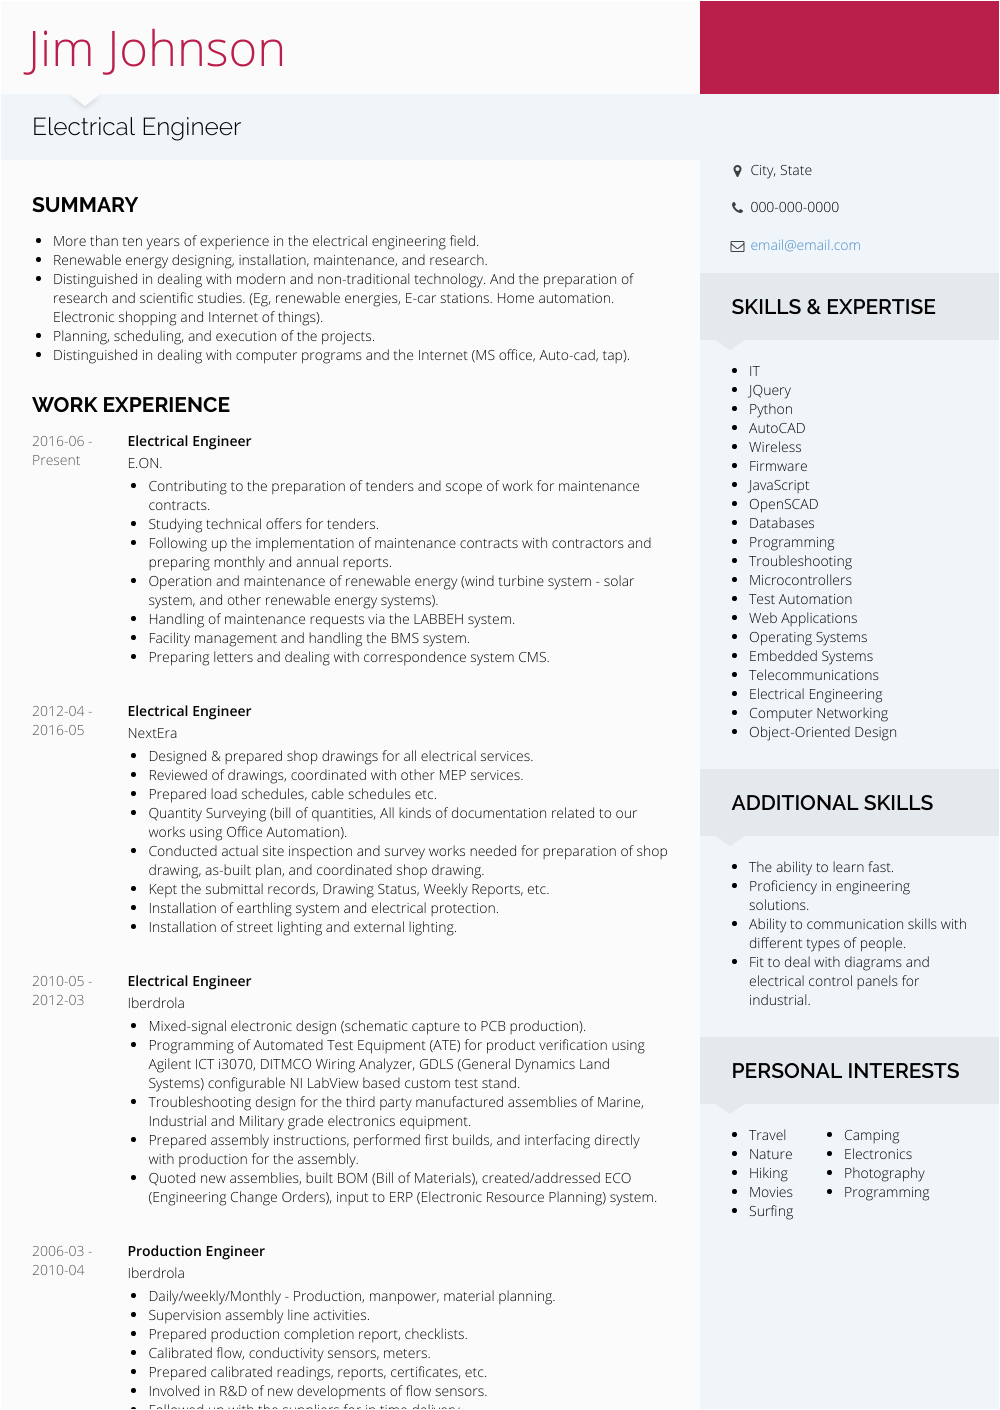 Free Resume Templates for Electrical Engineers Electrical Engineer Resume Samples and Templates